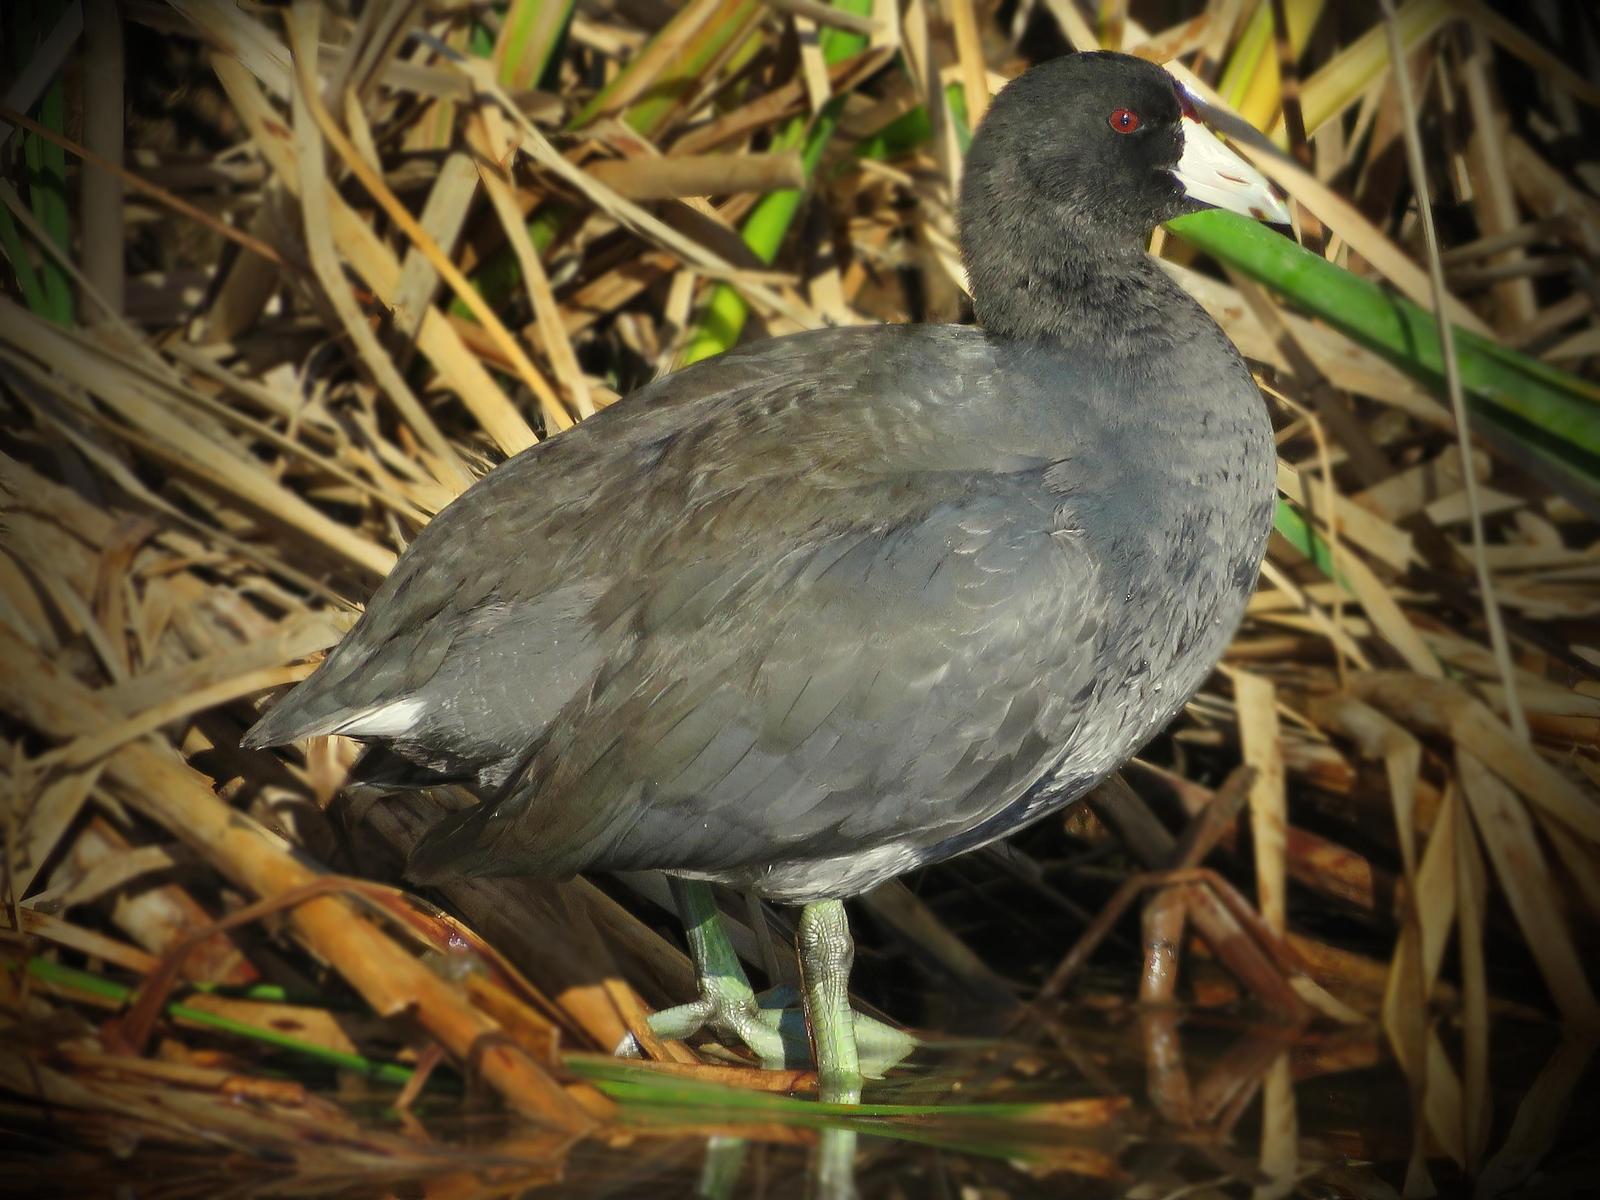 American Coot Photo by Bob Neugebauer